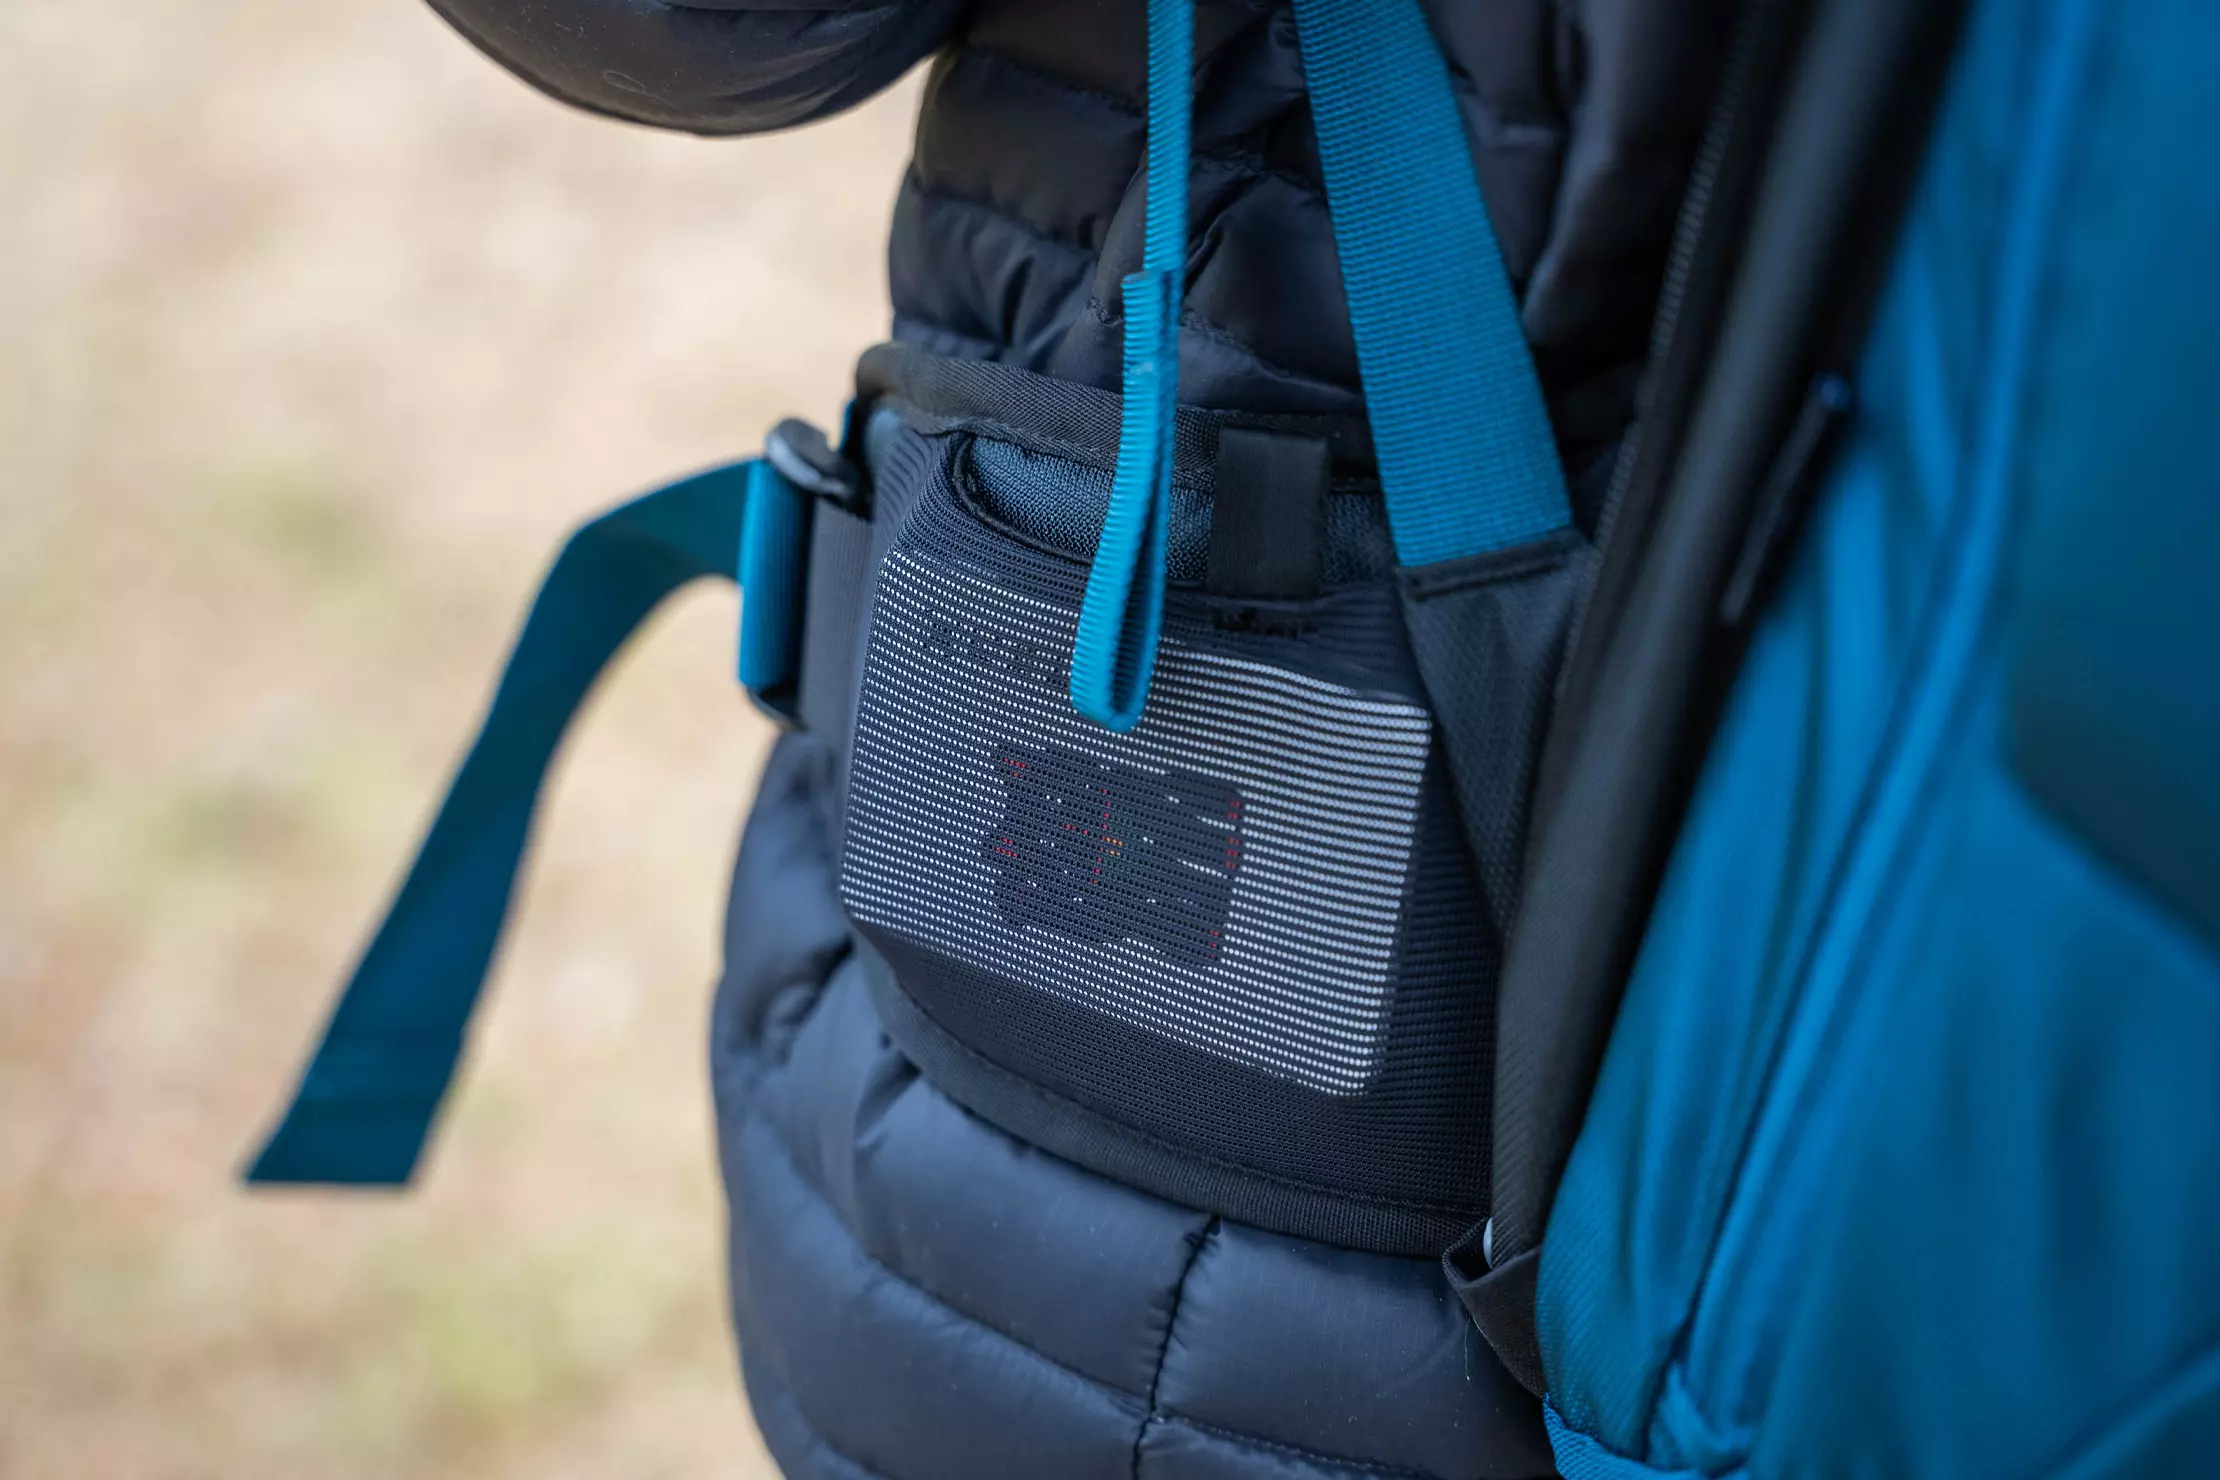 Osprey Fairview 40 | Breathable mesh helps with back panel ventilation.